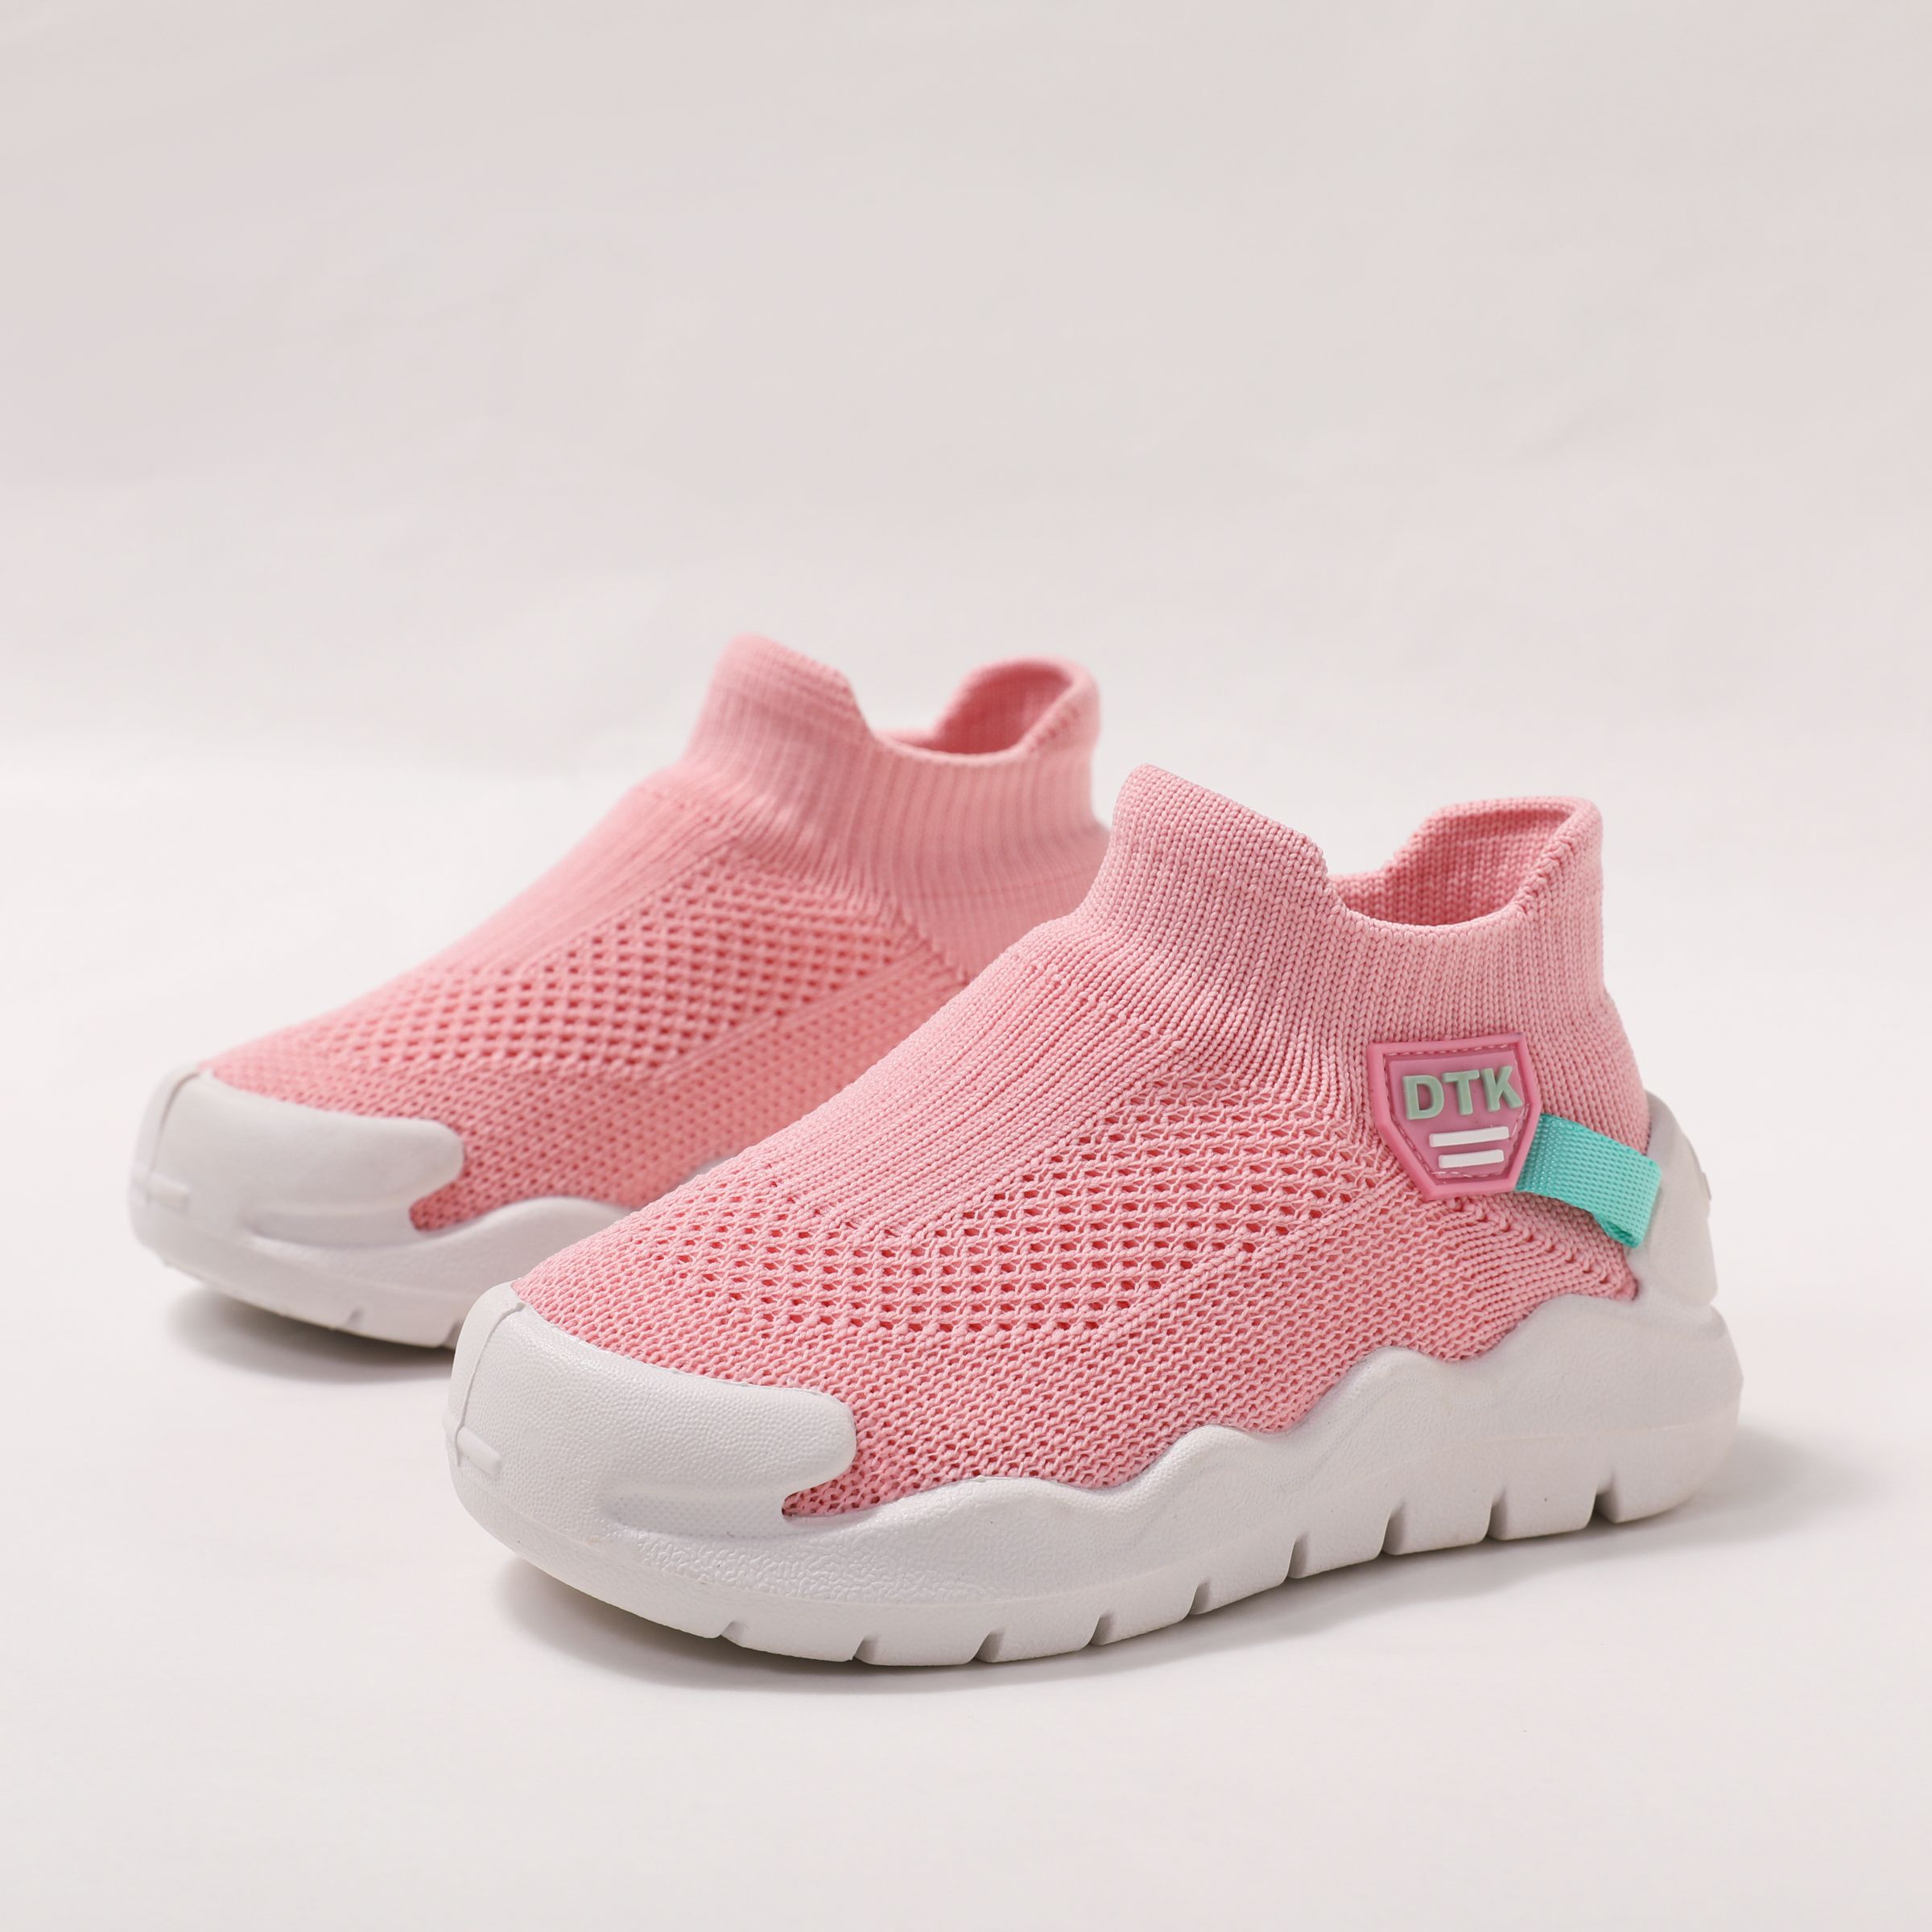 Toddler/Kid Sporty Style Mesh and Cotton Slip-on Sports Shoes